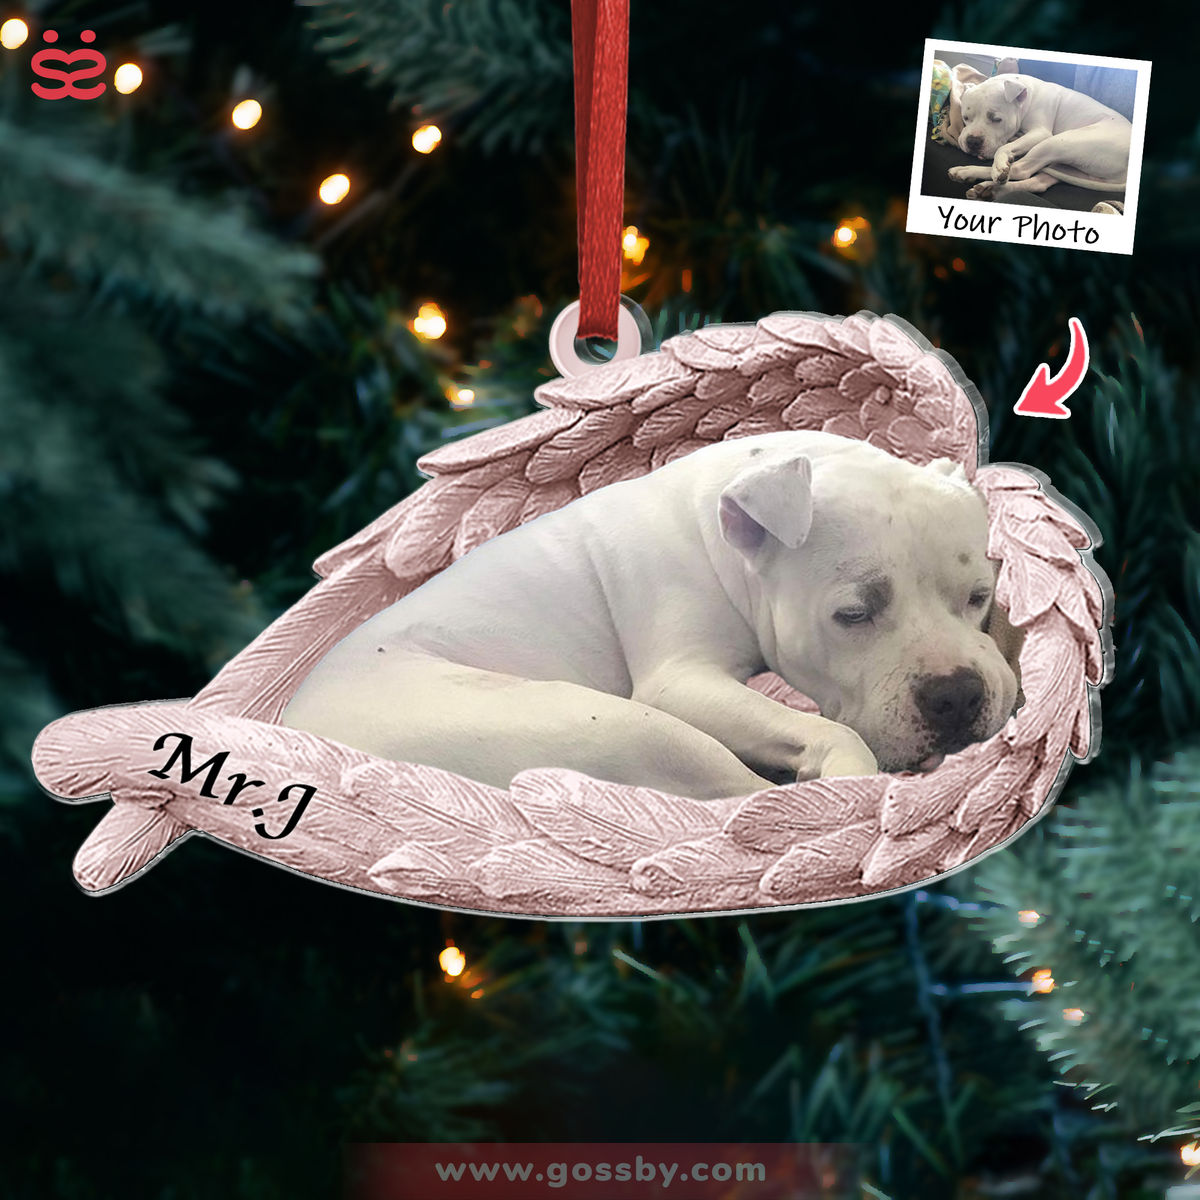 Dog Acrylic Ornament - Dog Lover Gifts - Sleeping Pet Within Angel Wings - Custom Ornament from Photo - 2D Acrylic Ornament_3